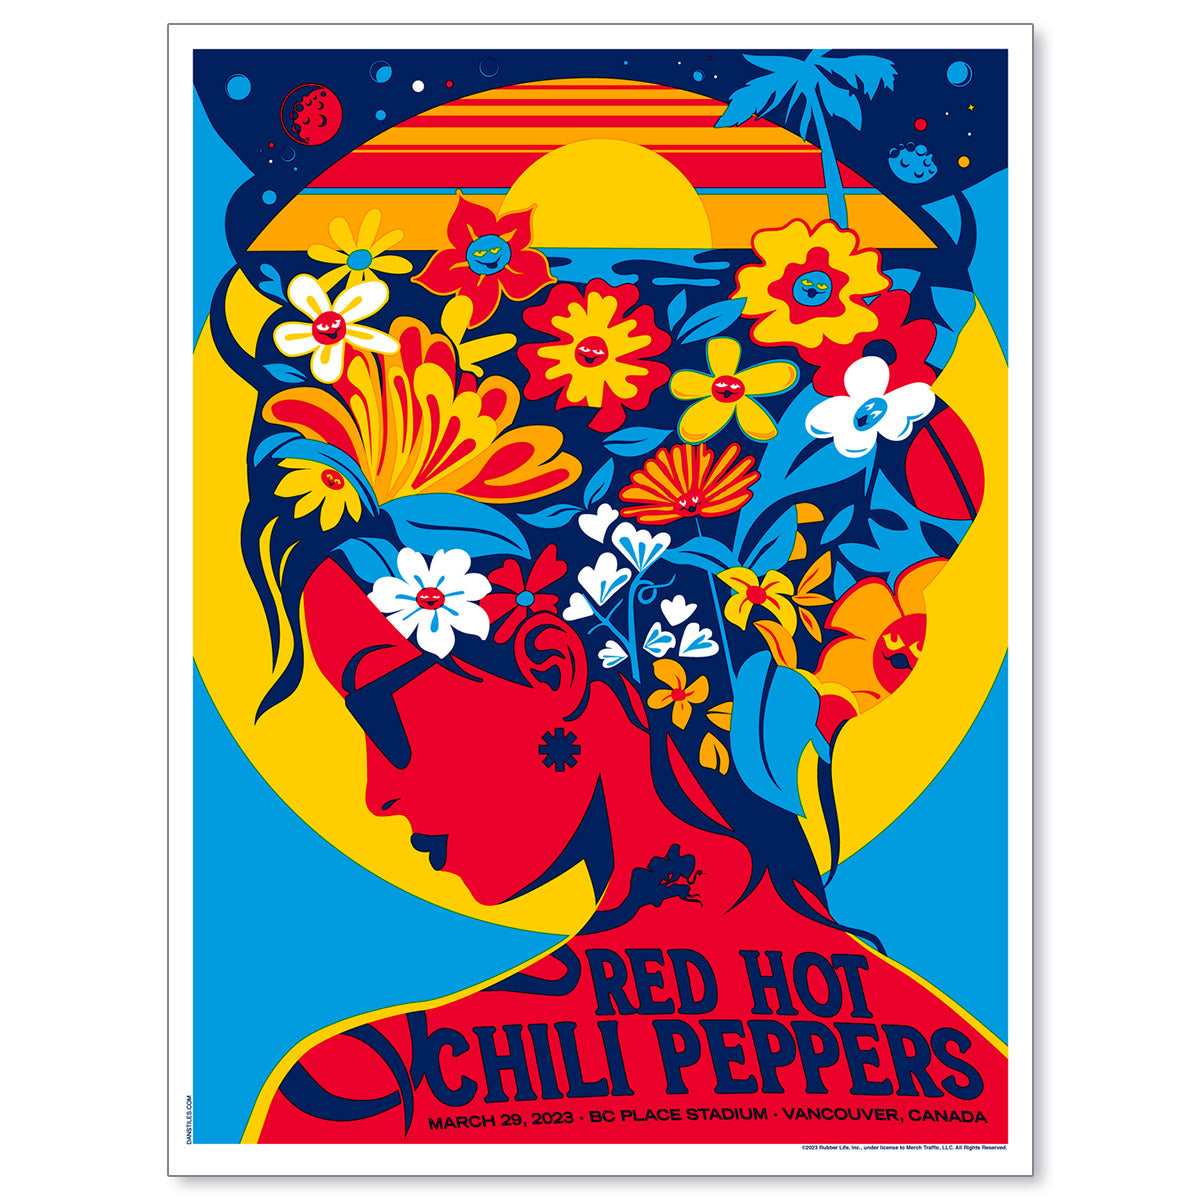 Red Hot Chili Peppers Vancouver March 29, 2023